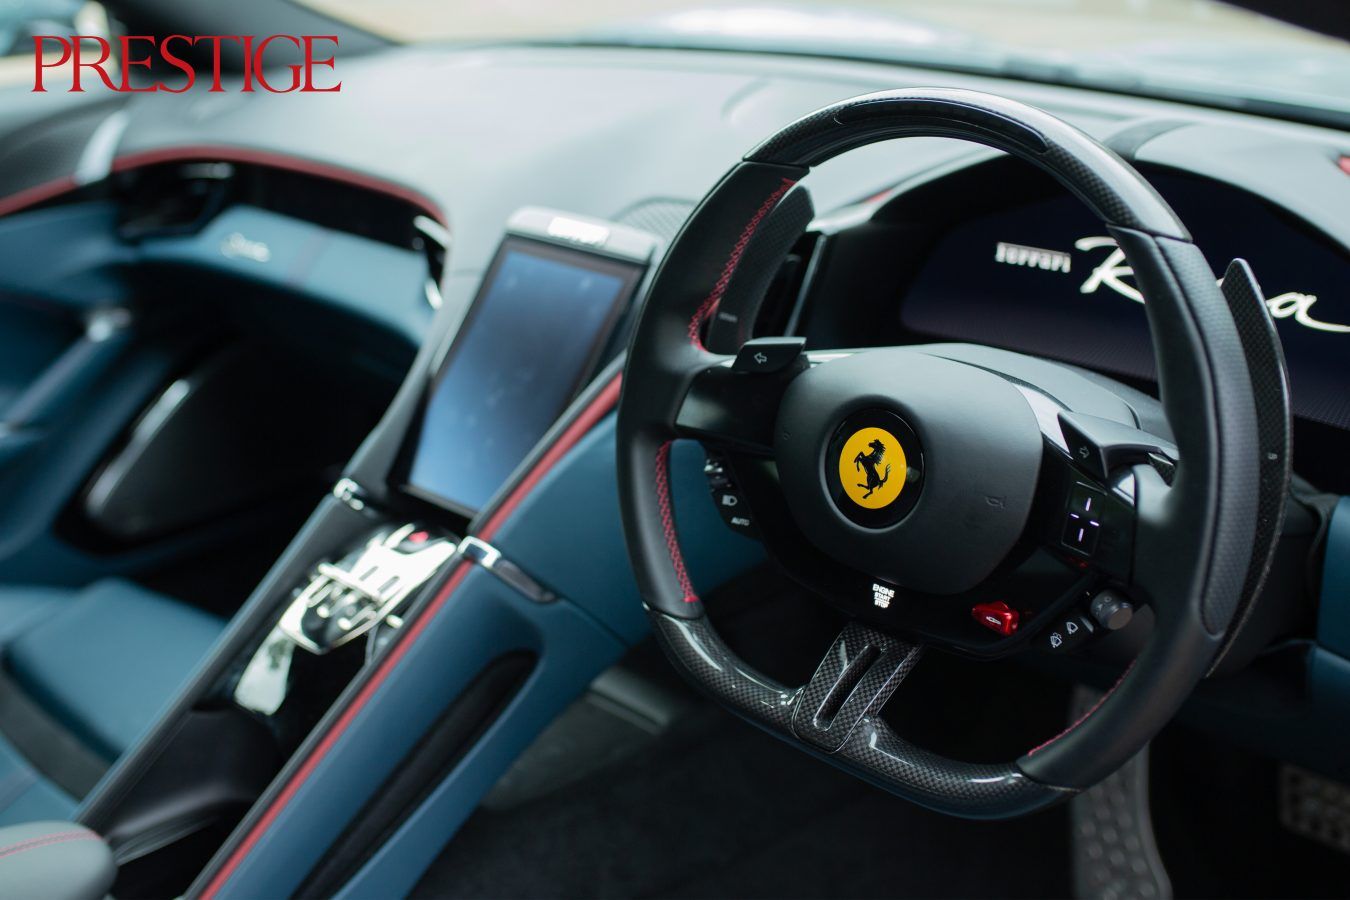 Ferrari teams up with Prestige to present an exquisite Roma Sensorial Evening